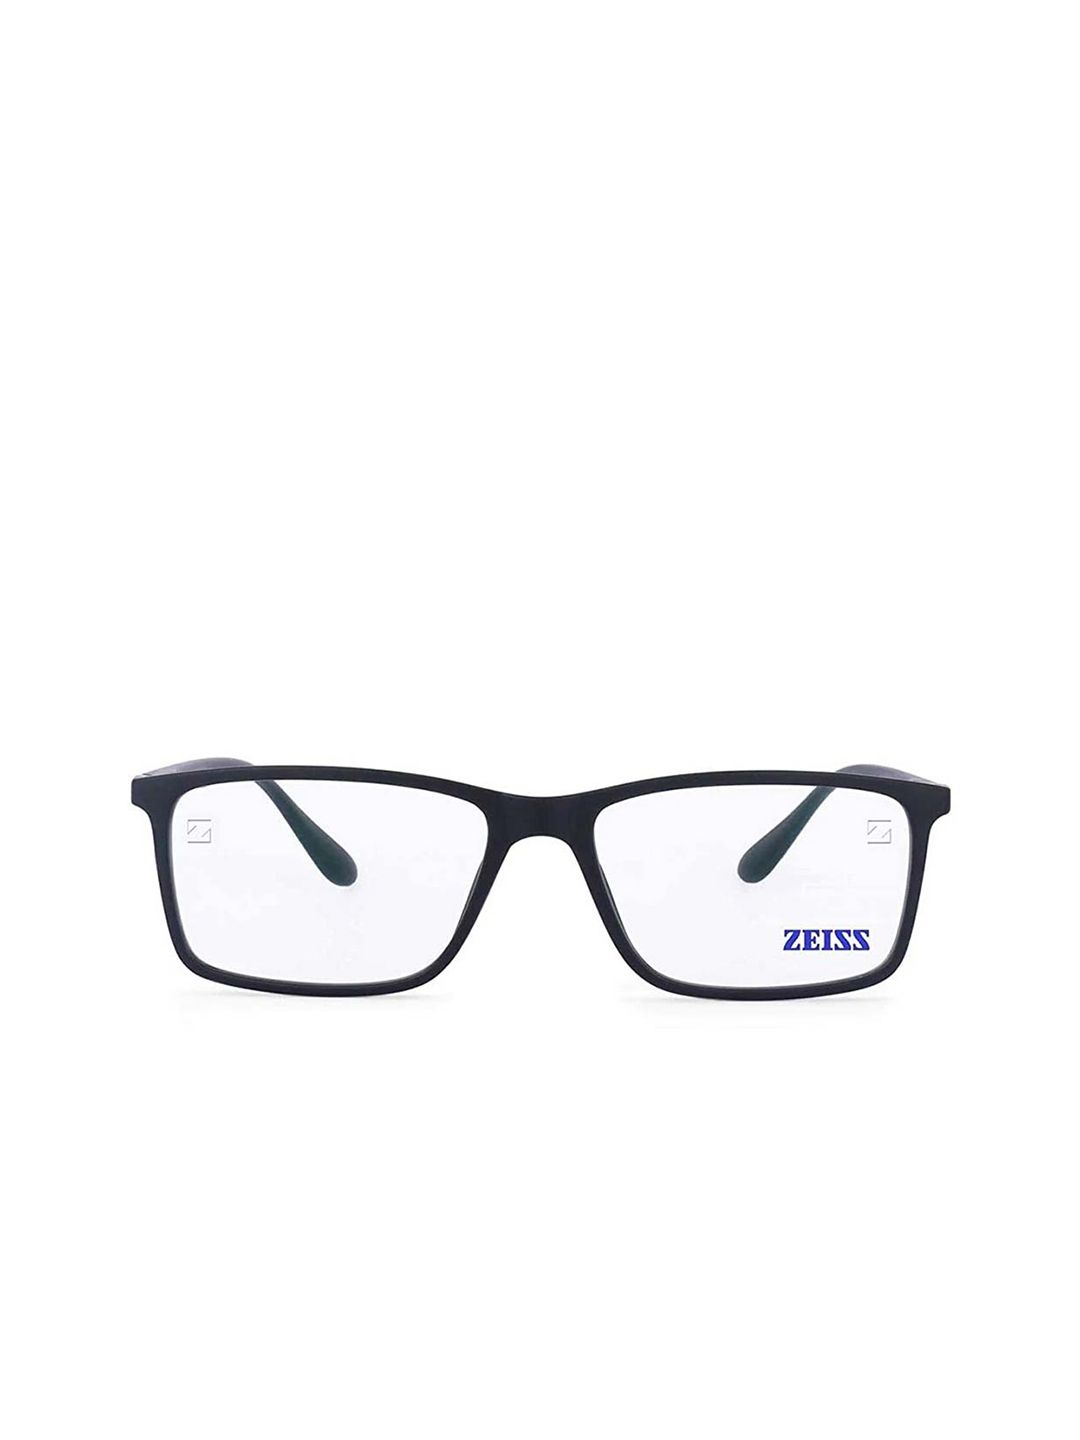 Intellilens ZEISS Unisex Black Full Rim Frames with Dura Vision Blue Protect Computer Price in India